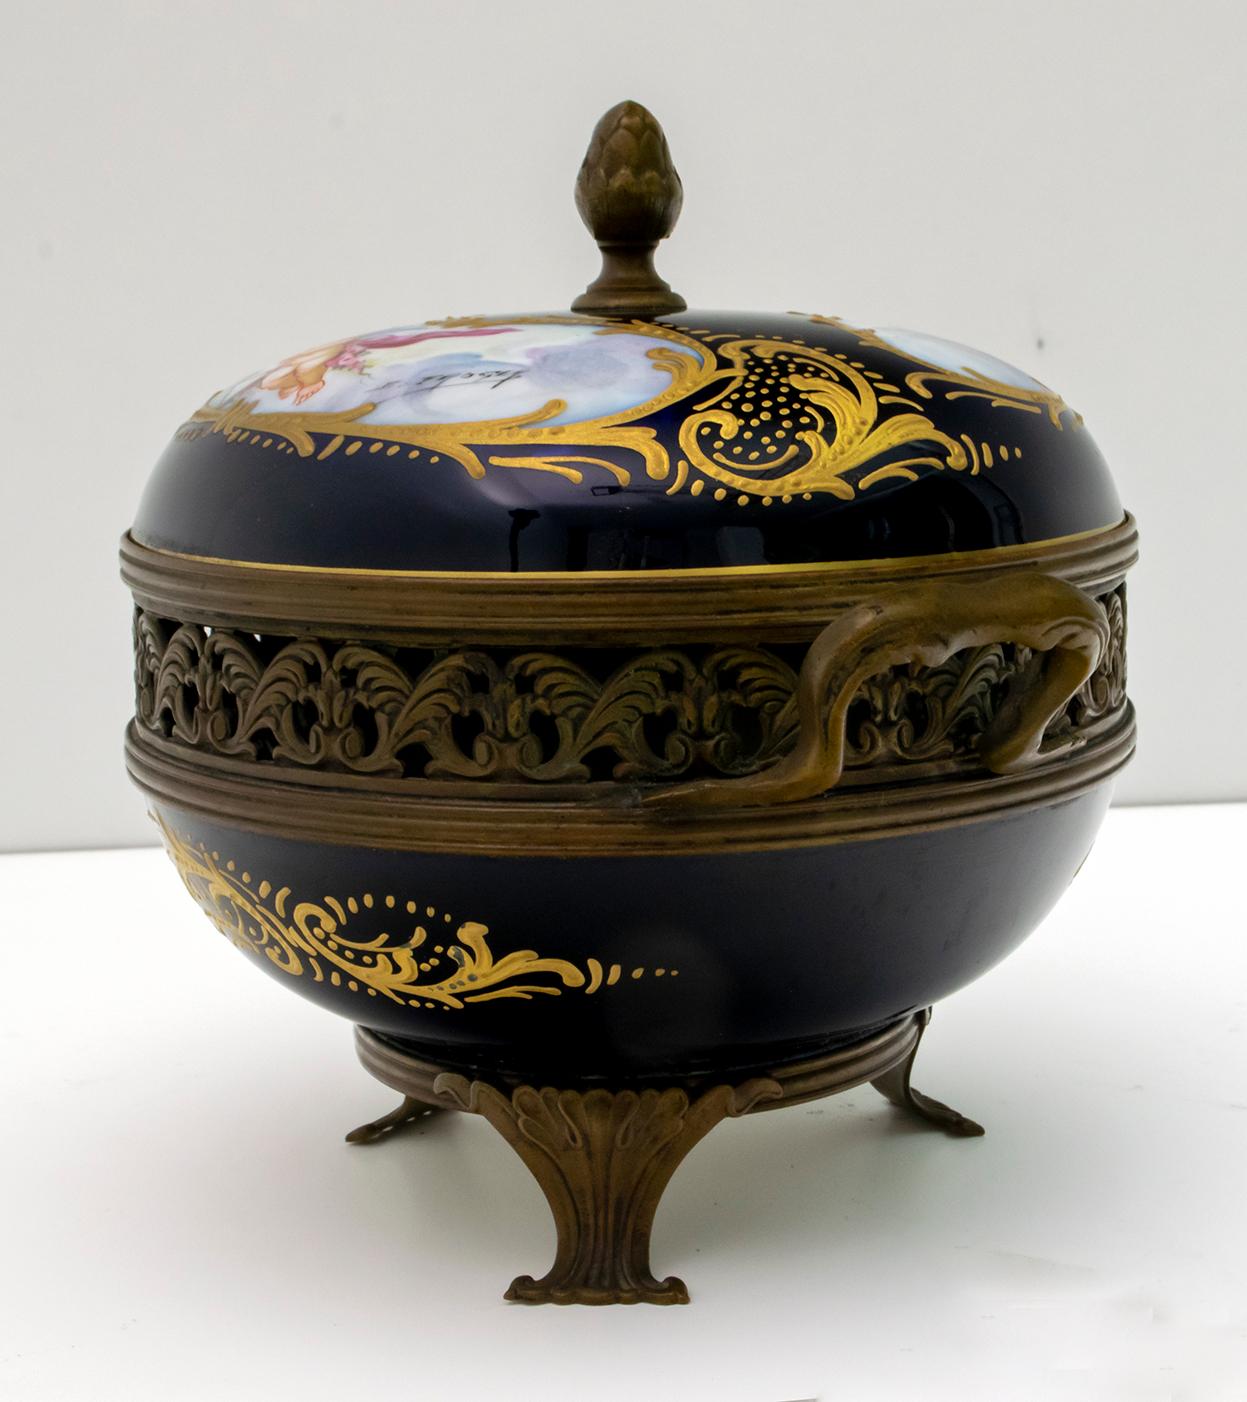 Signed E. Froger 19th Century French Porcelain Potpourri by Sevres, 1880 For Sale 11